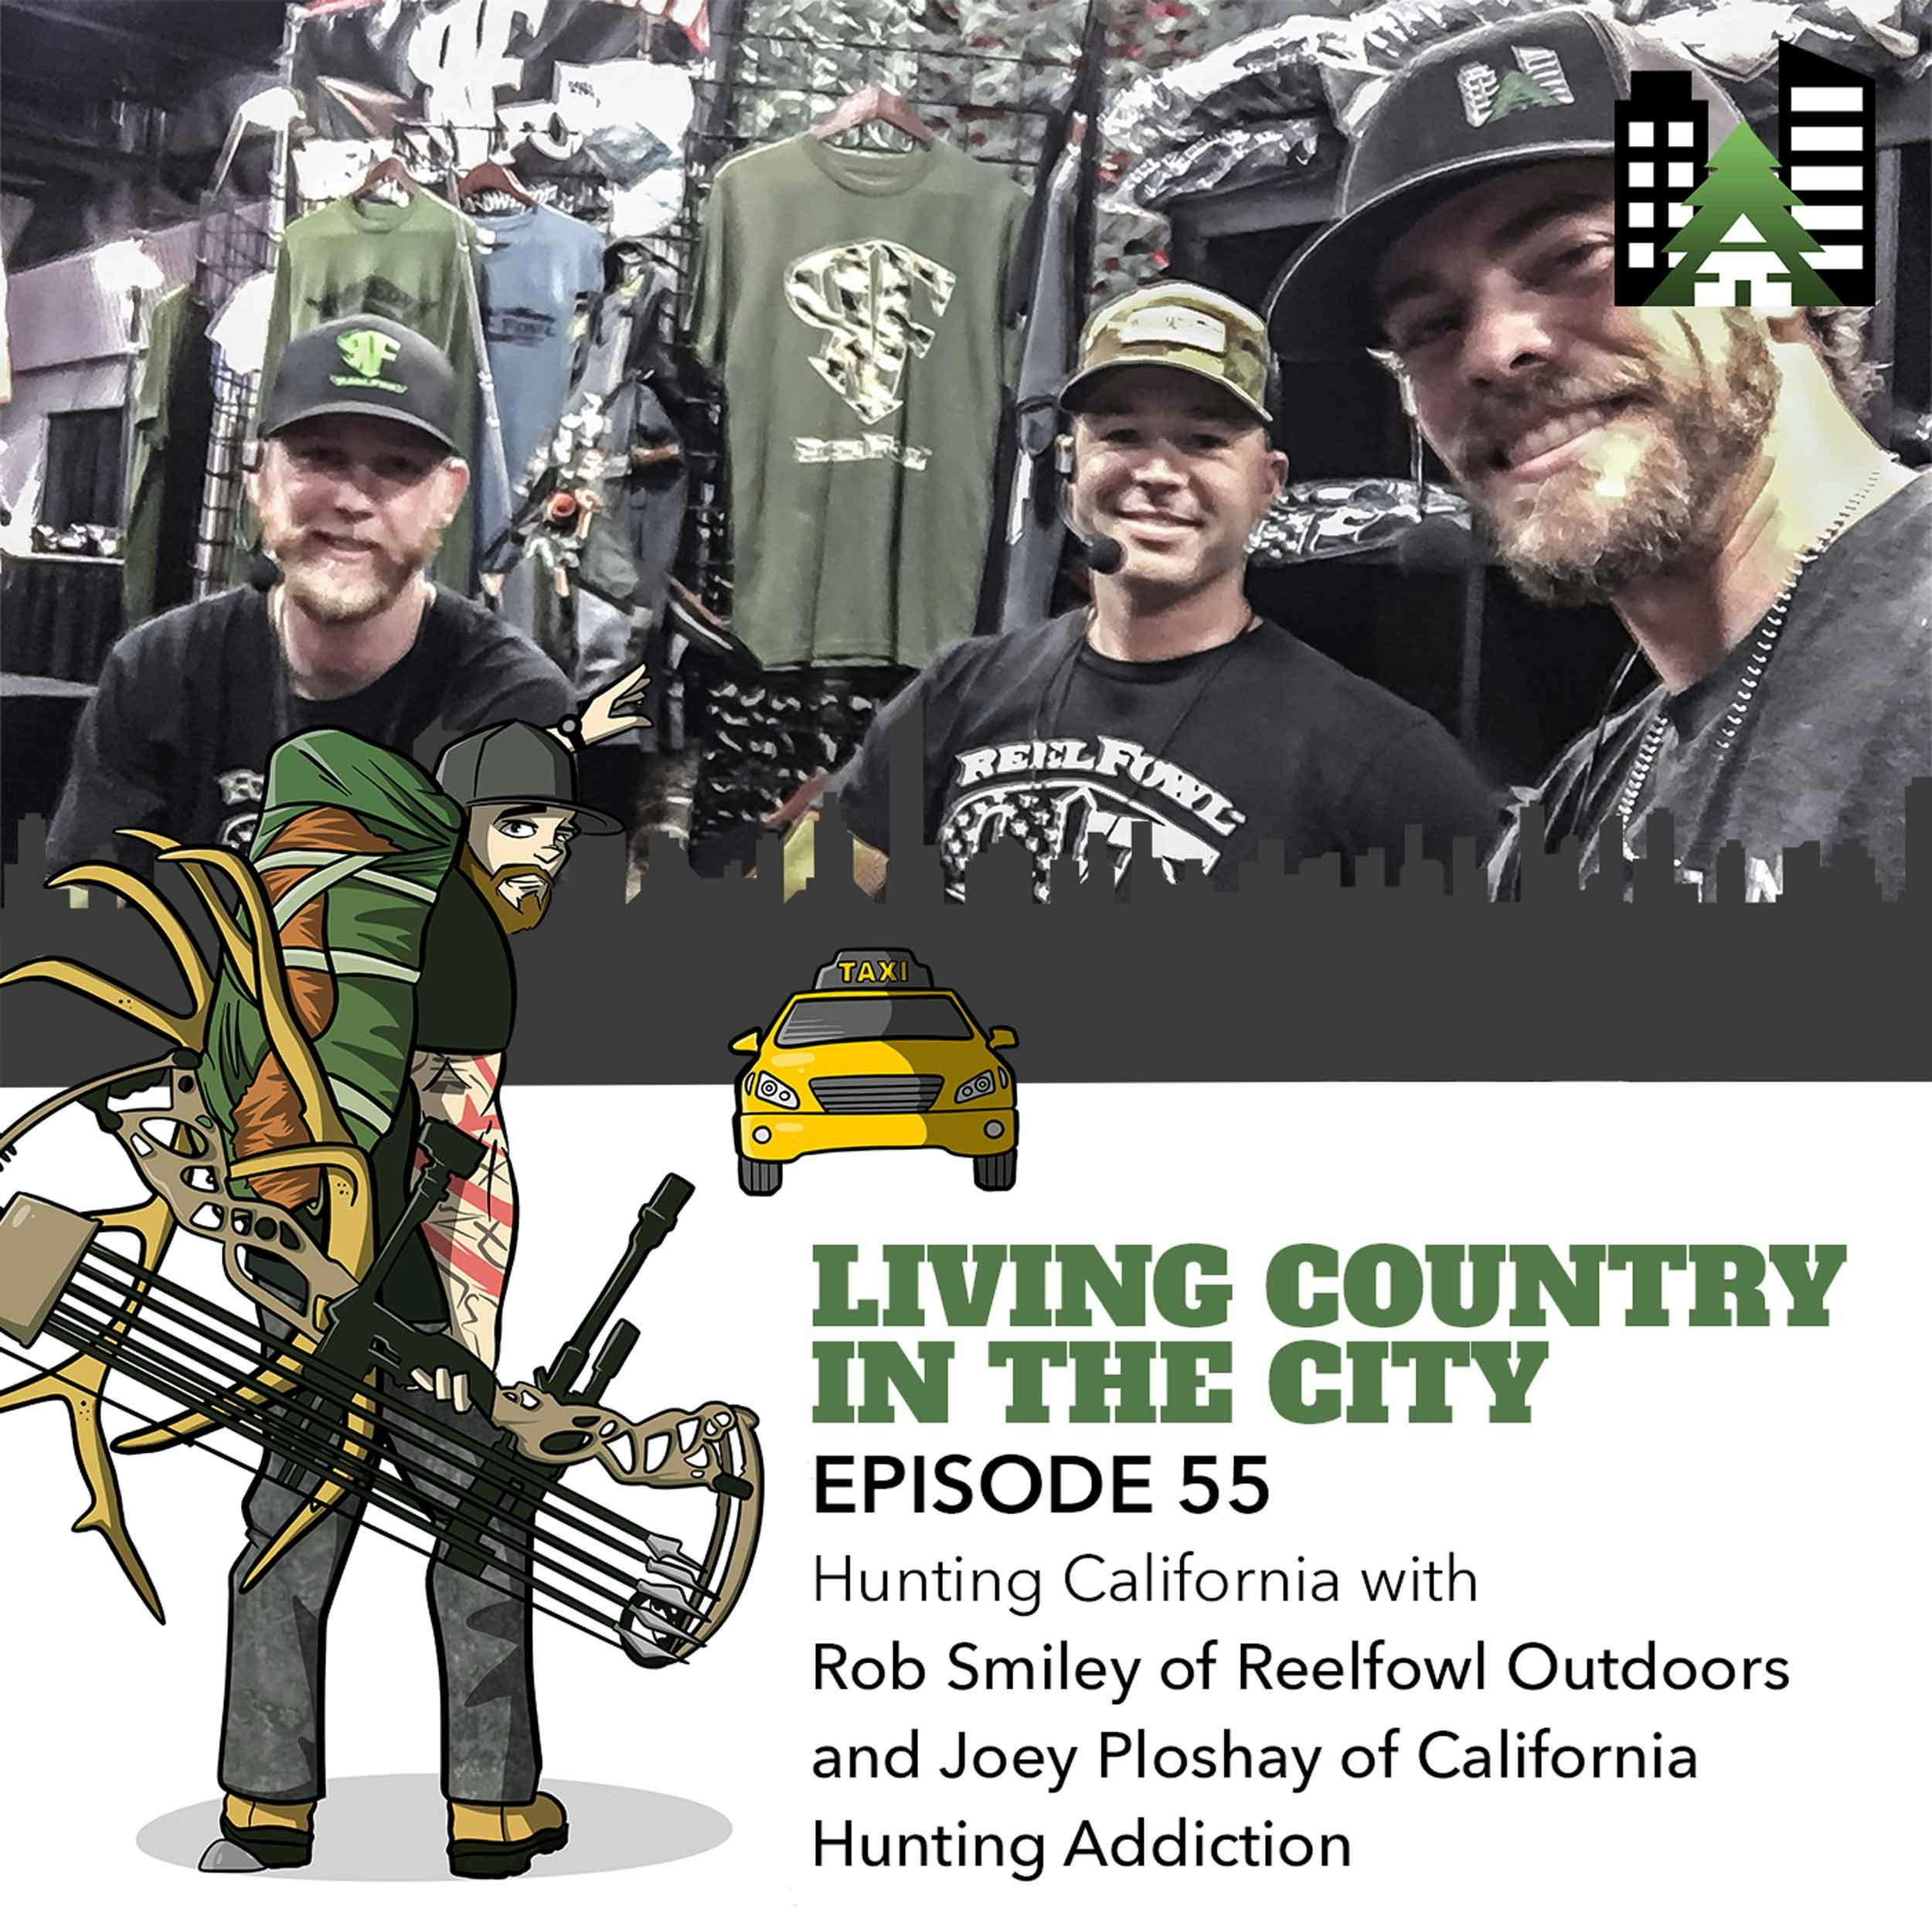 Ep 55 - Hunting California with Rob Smiley of Reelfowl Outdoors and Joey Ploshay of California Hunting Addiction